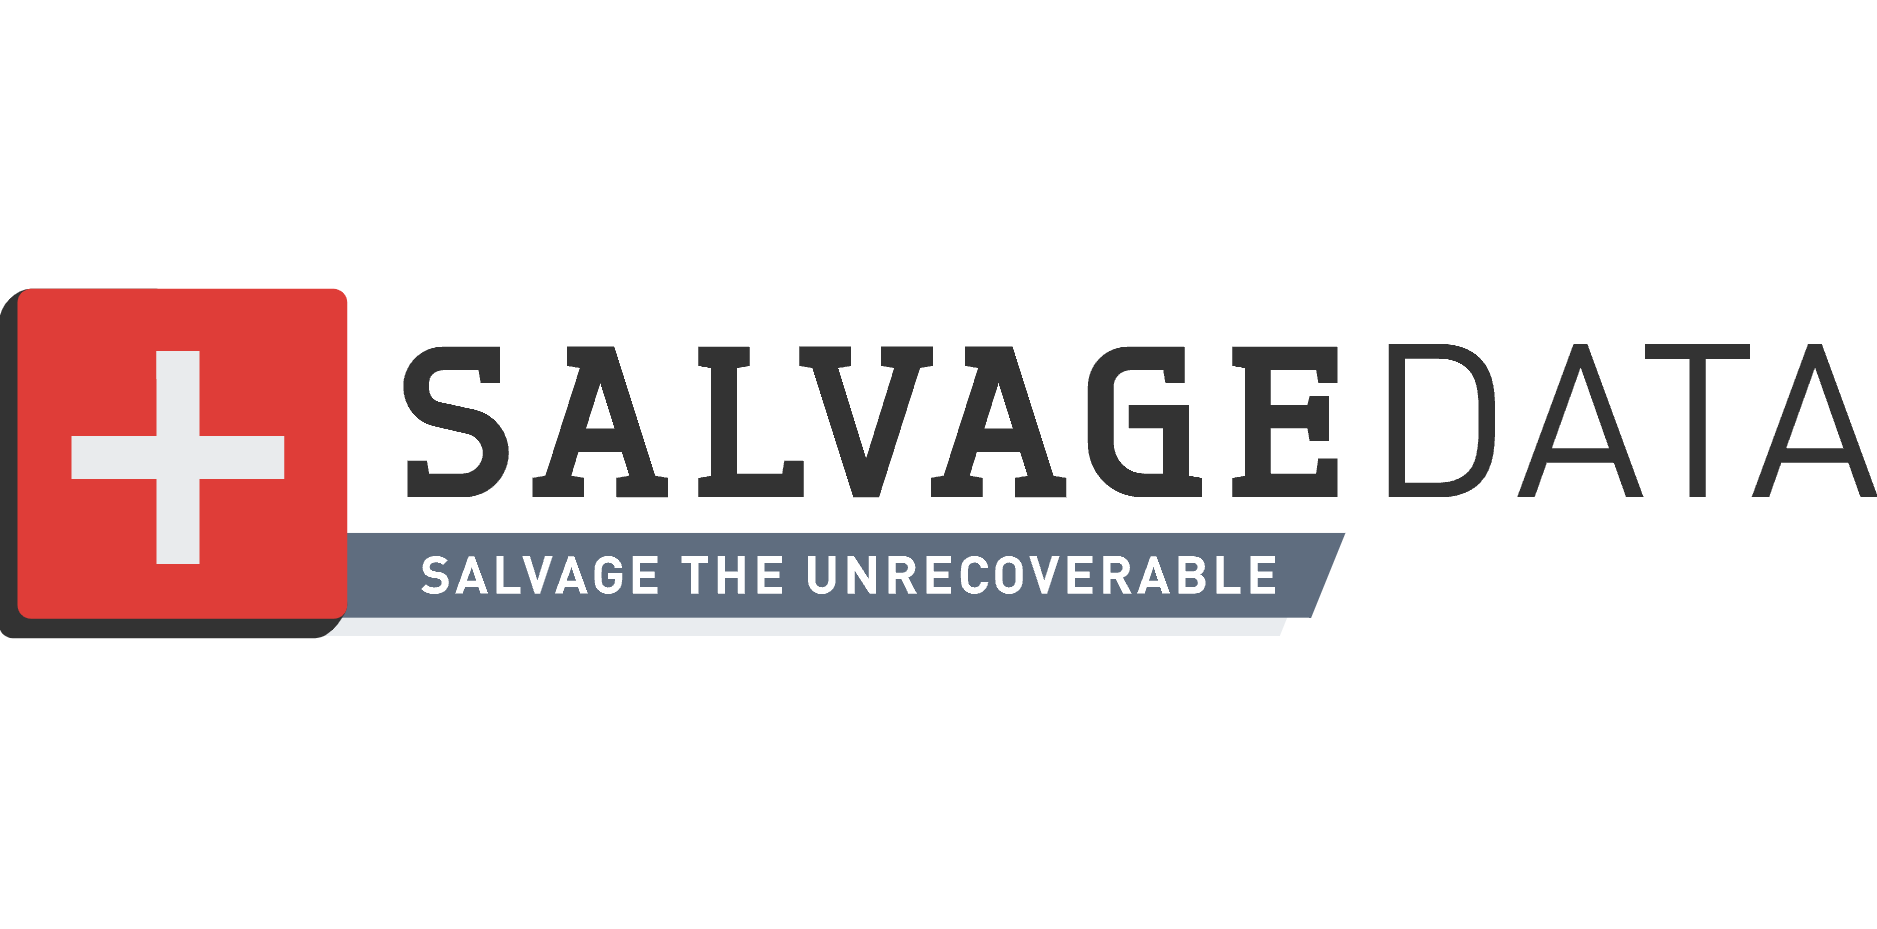 SALVAGEDATA Recovery Services